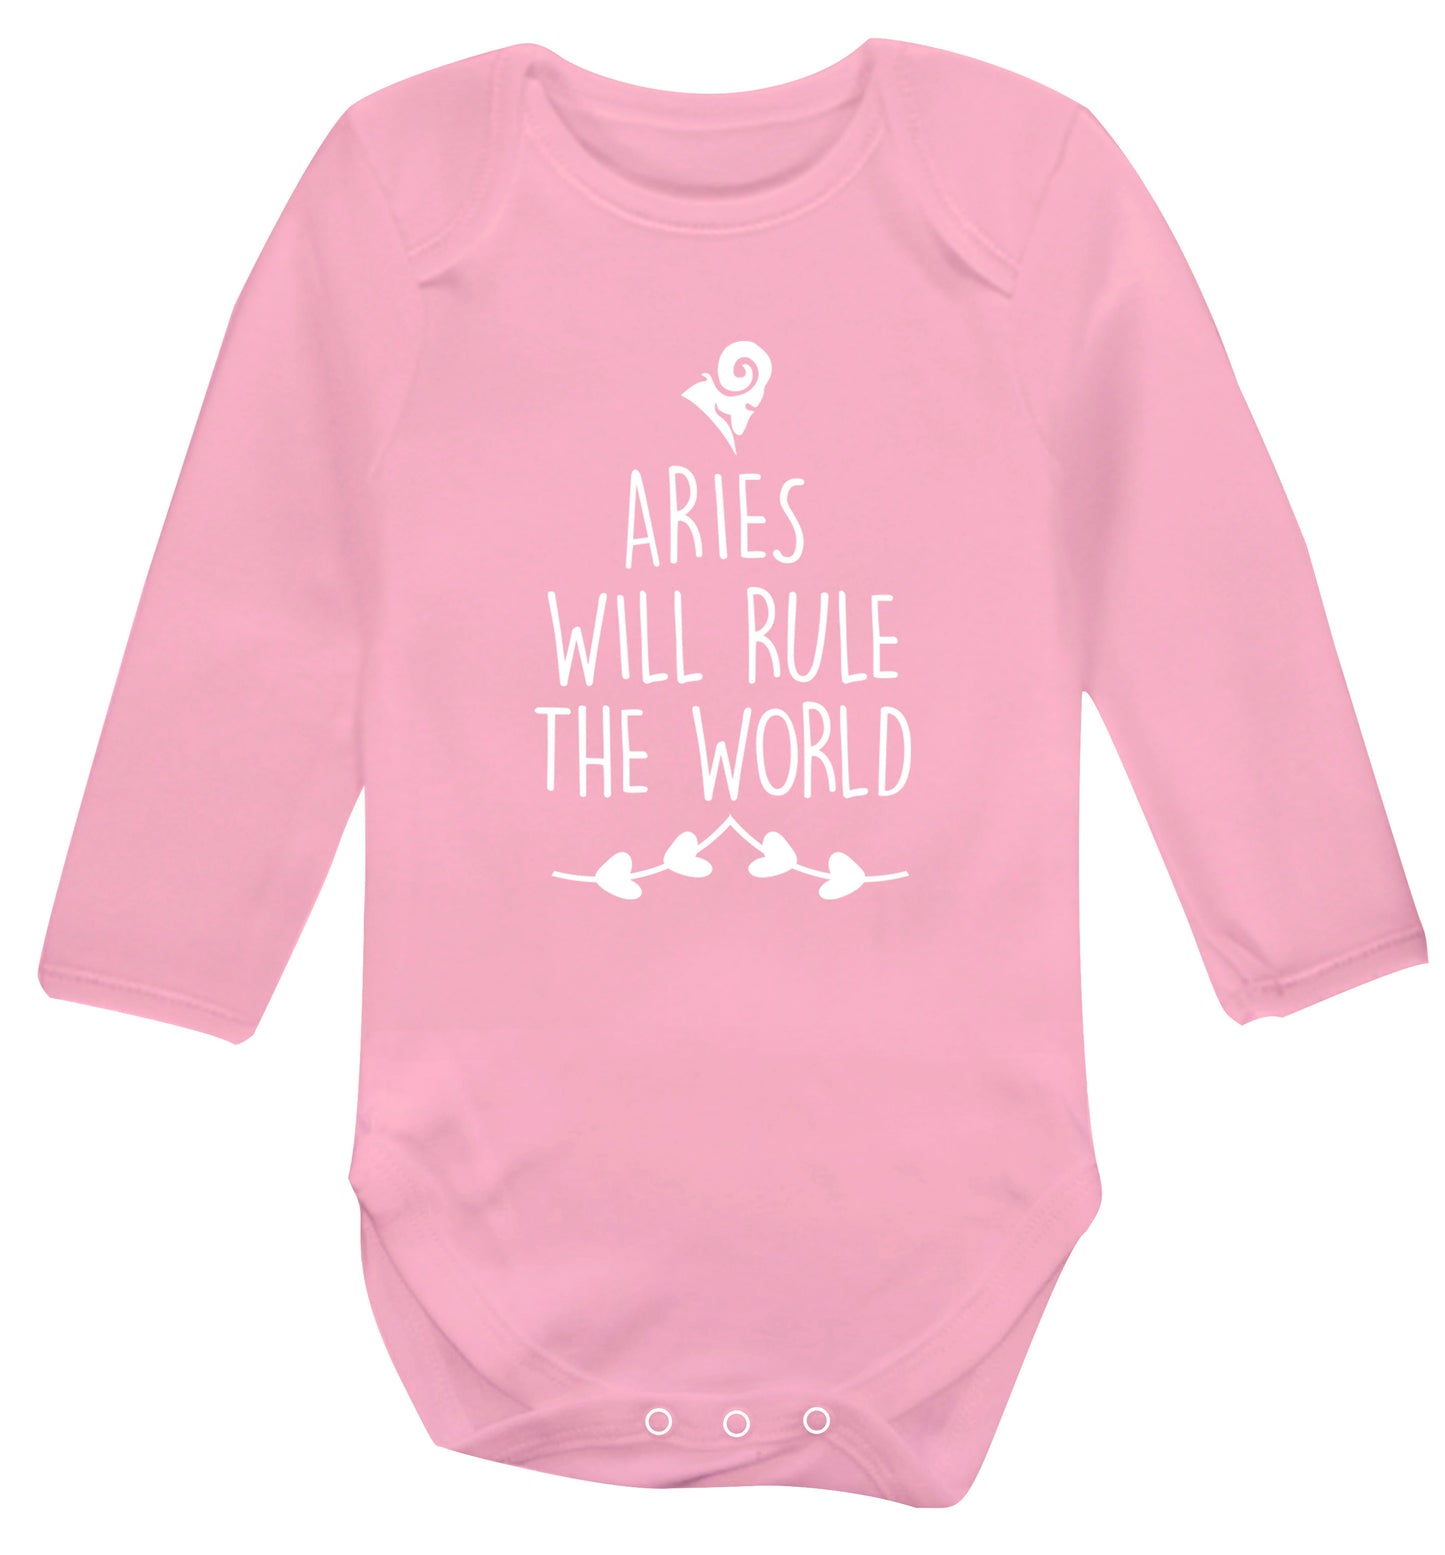 Aries will rule the world Baby Vest long sleeved pale pink 6-12 months